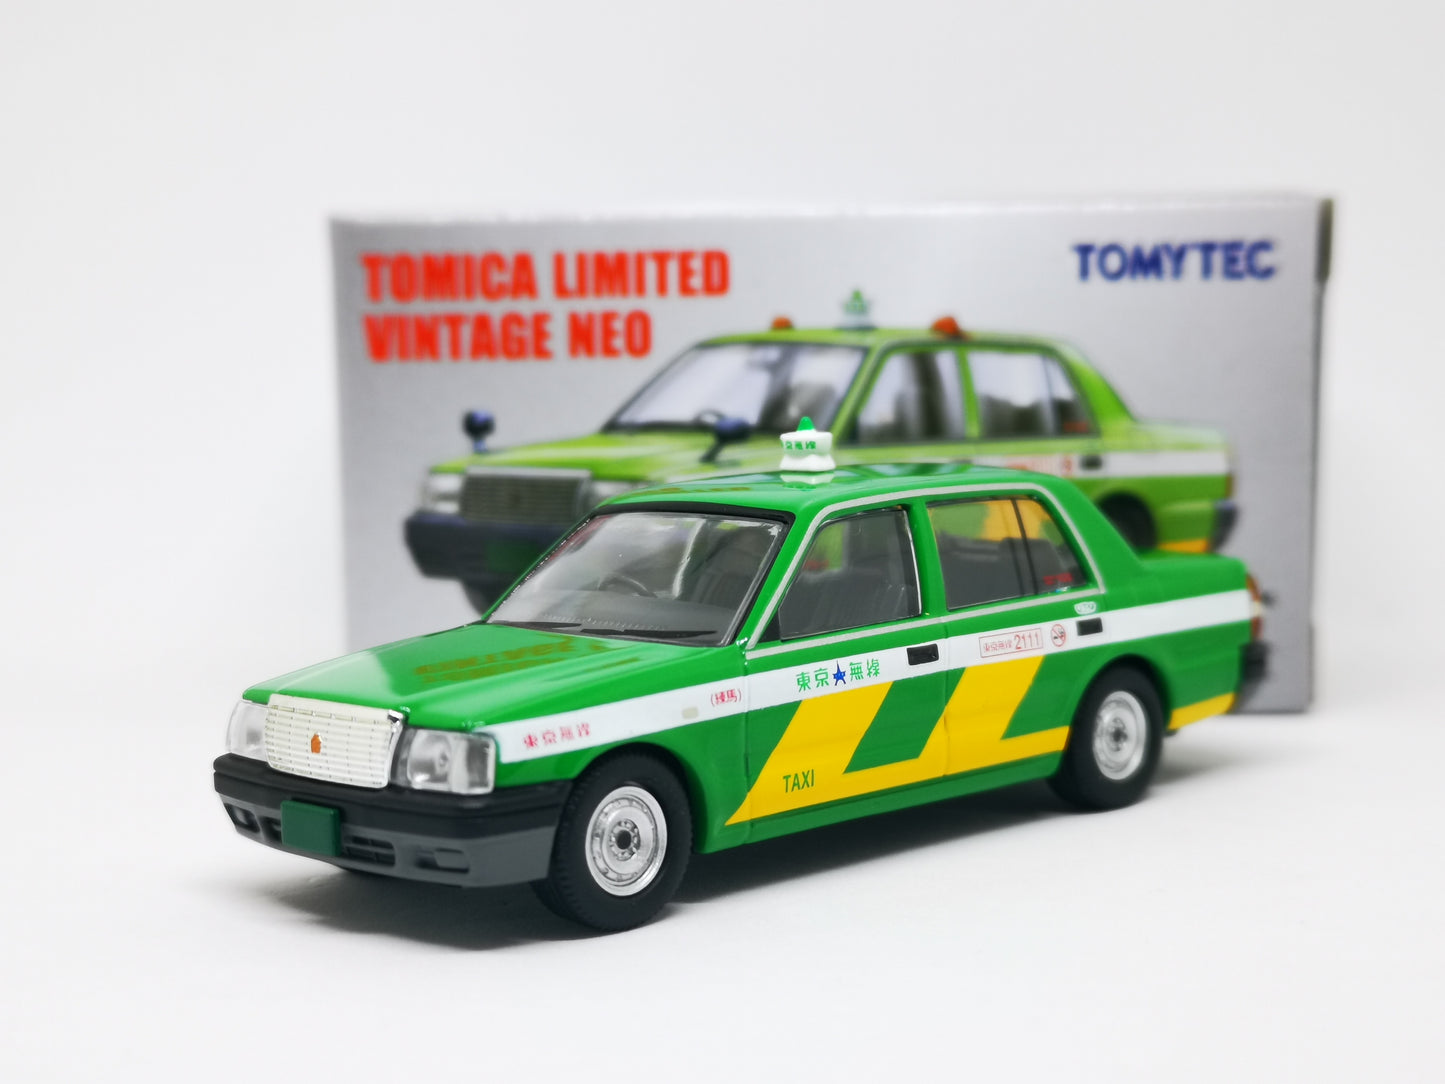 Tomica Limited Vintage Neo LV-N218a TOYOTA CROWN COMFORT Tokyo
Musen Taxi Green